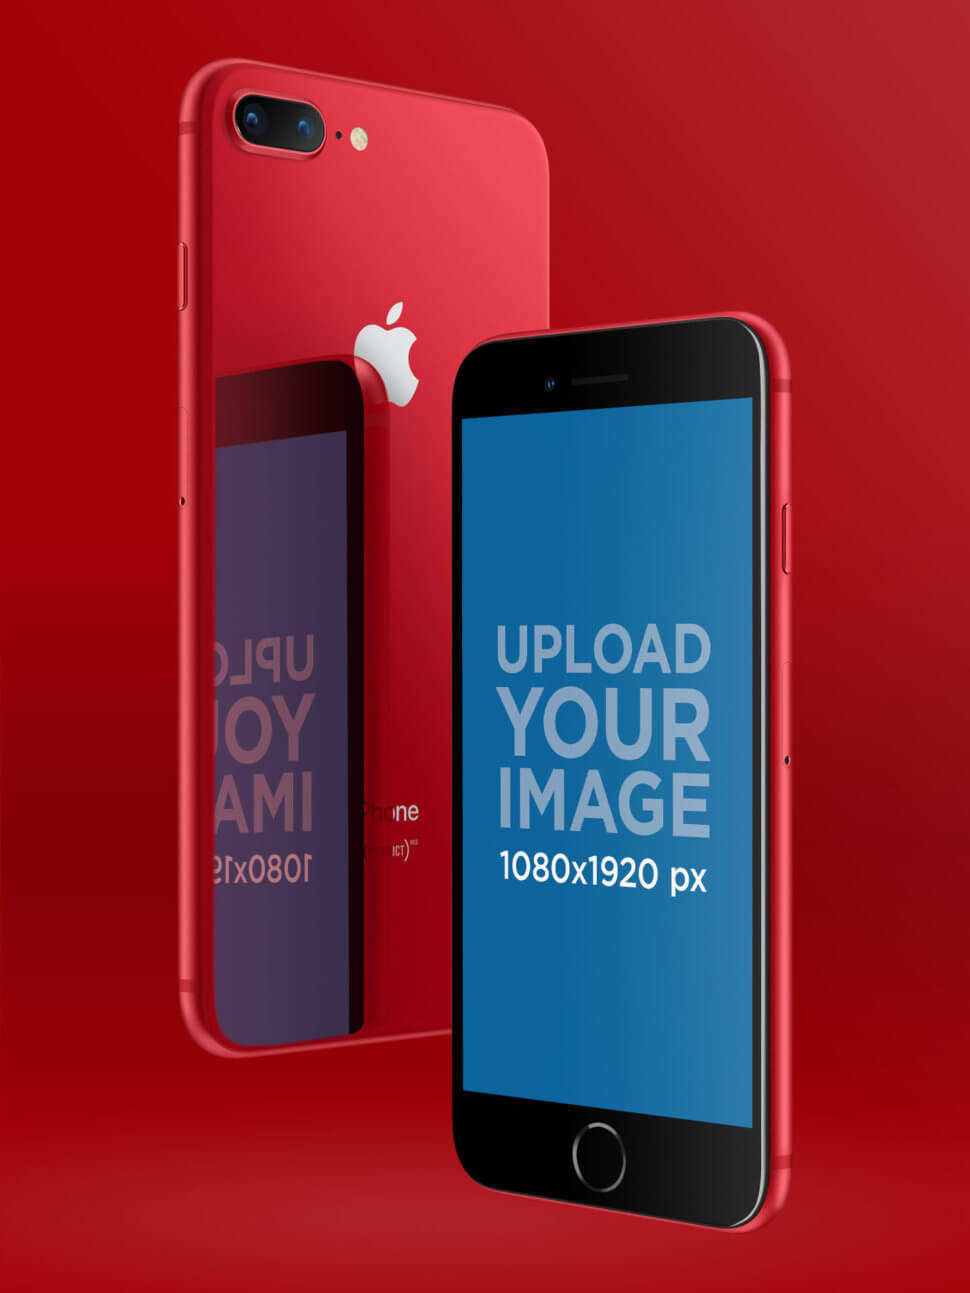 mockup shirt t generator Blog Mockups Placeit  8 Seconds  Make Red in iPhone